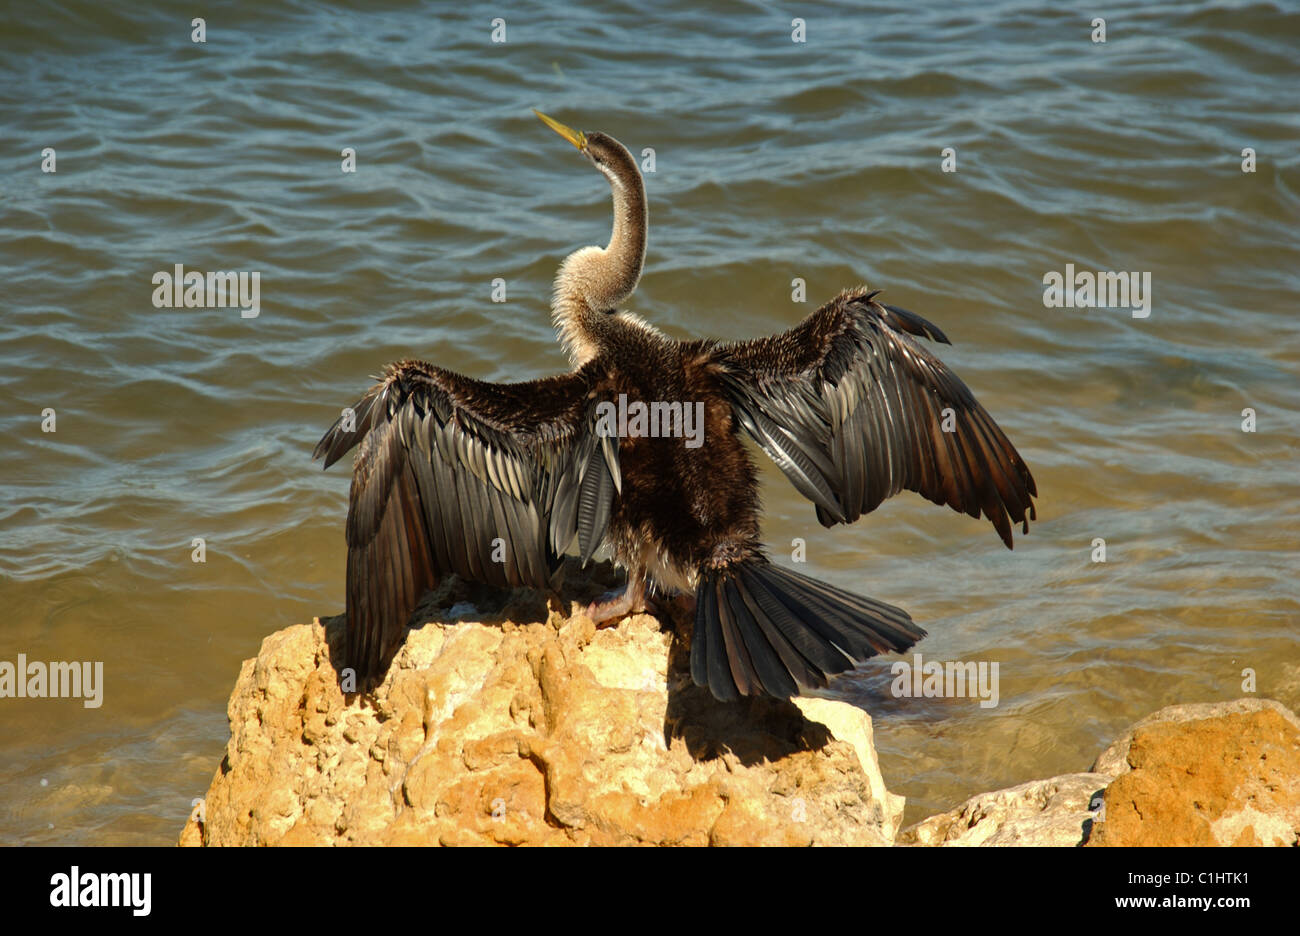 A Darter bird (Anhinga melanogaster) on the shoreline rocks drying its wings, Western Australia. Darters are also known as Snake birds. Stock Photo